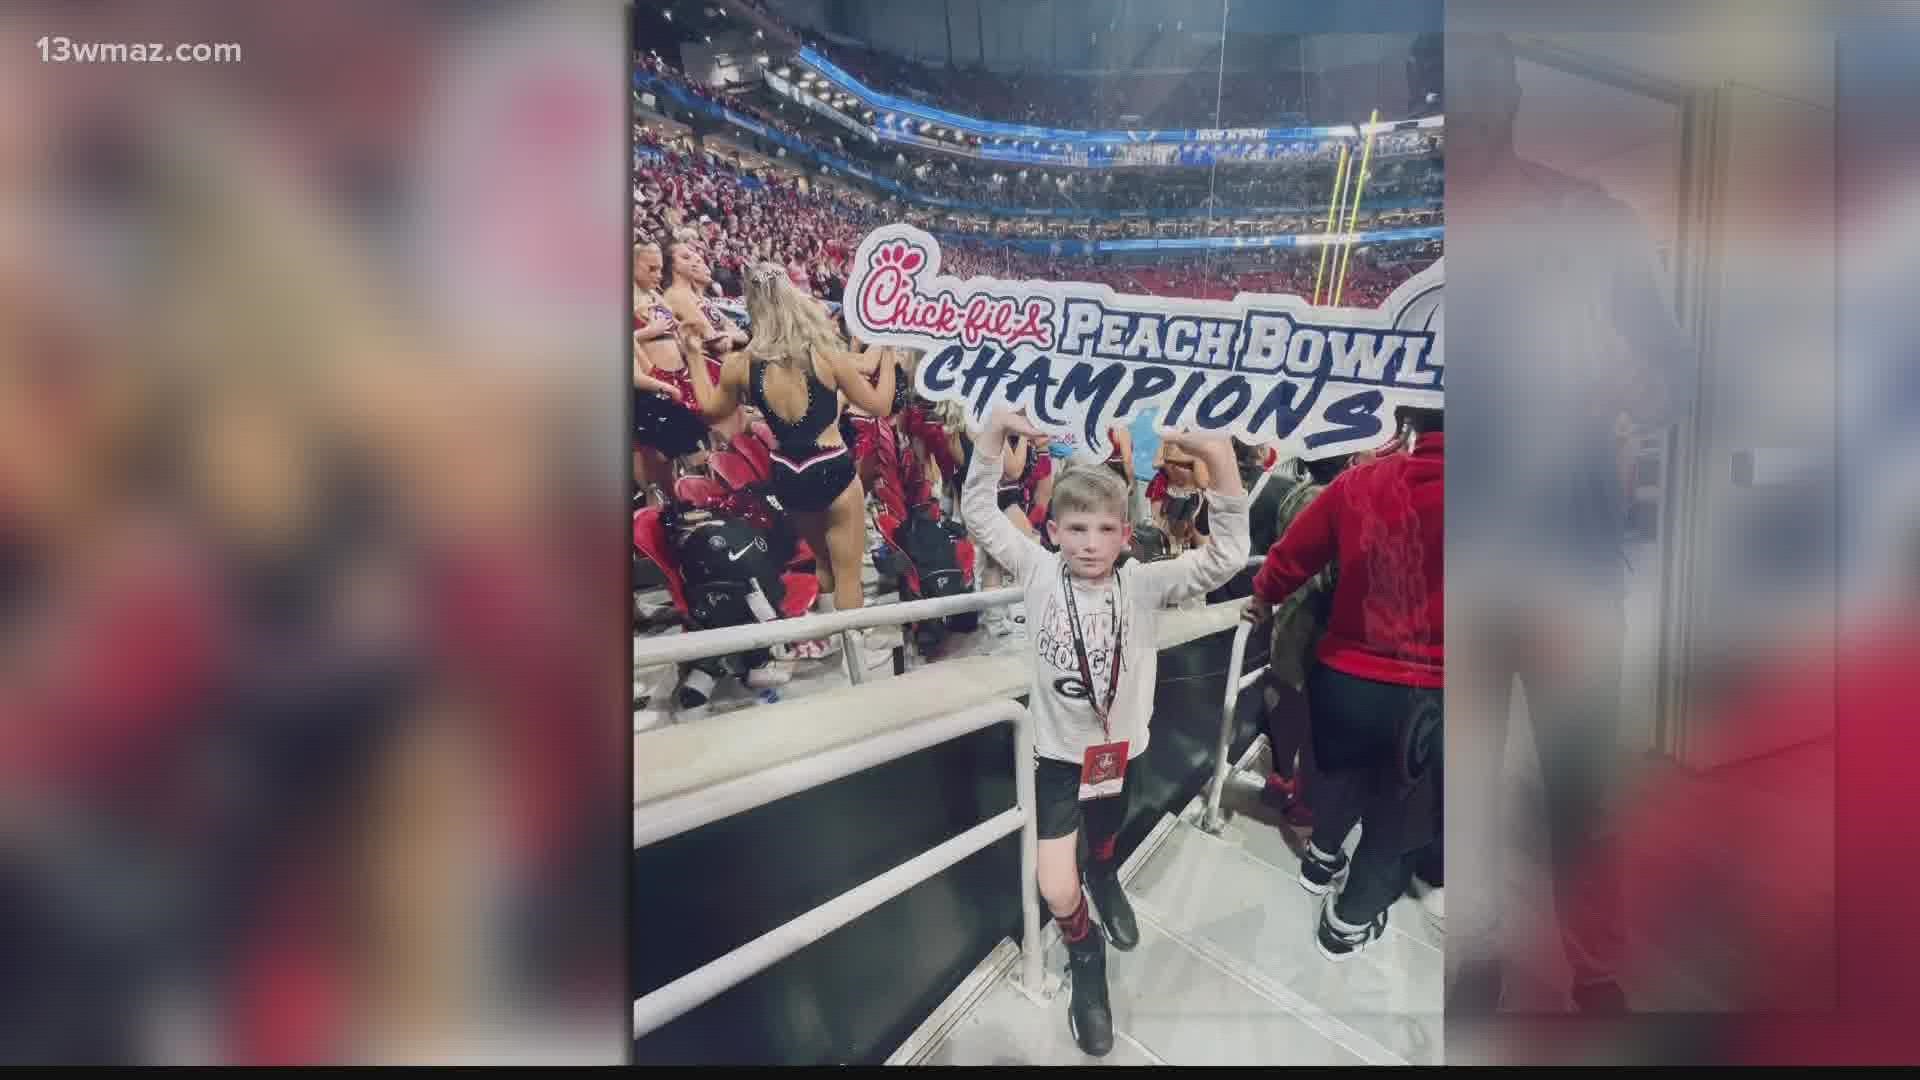 Kyler Pike was diagnosed with leukemia in 2017. He's been in remission for two years. With the help of Team Impact, they gave him a big surprise.